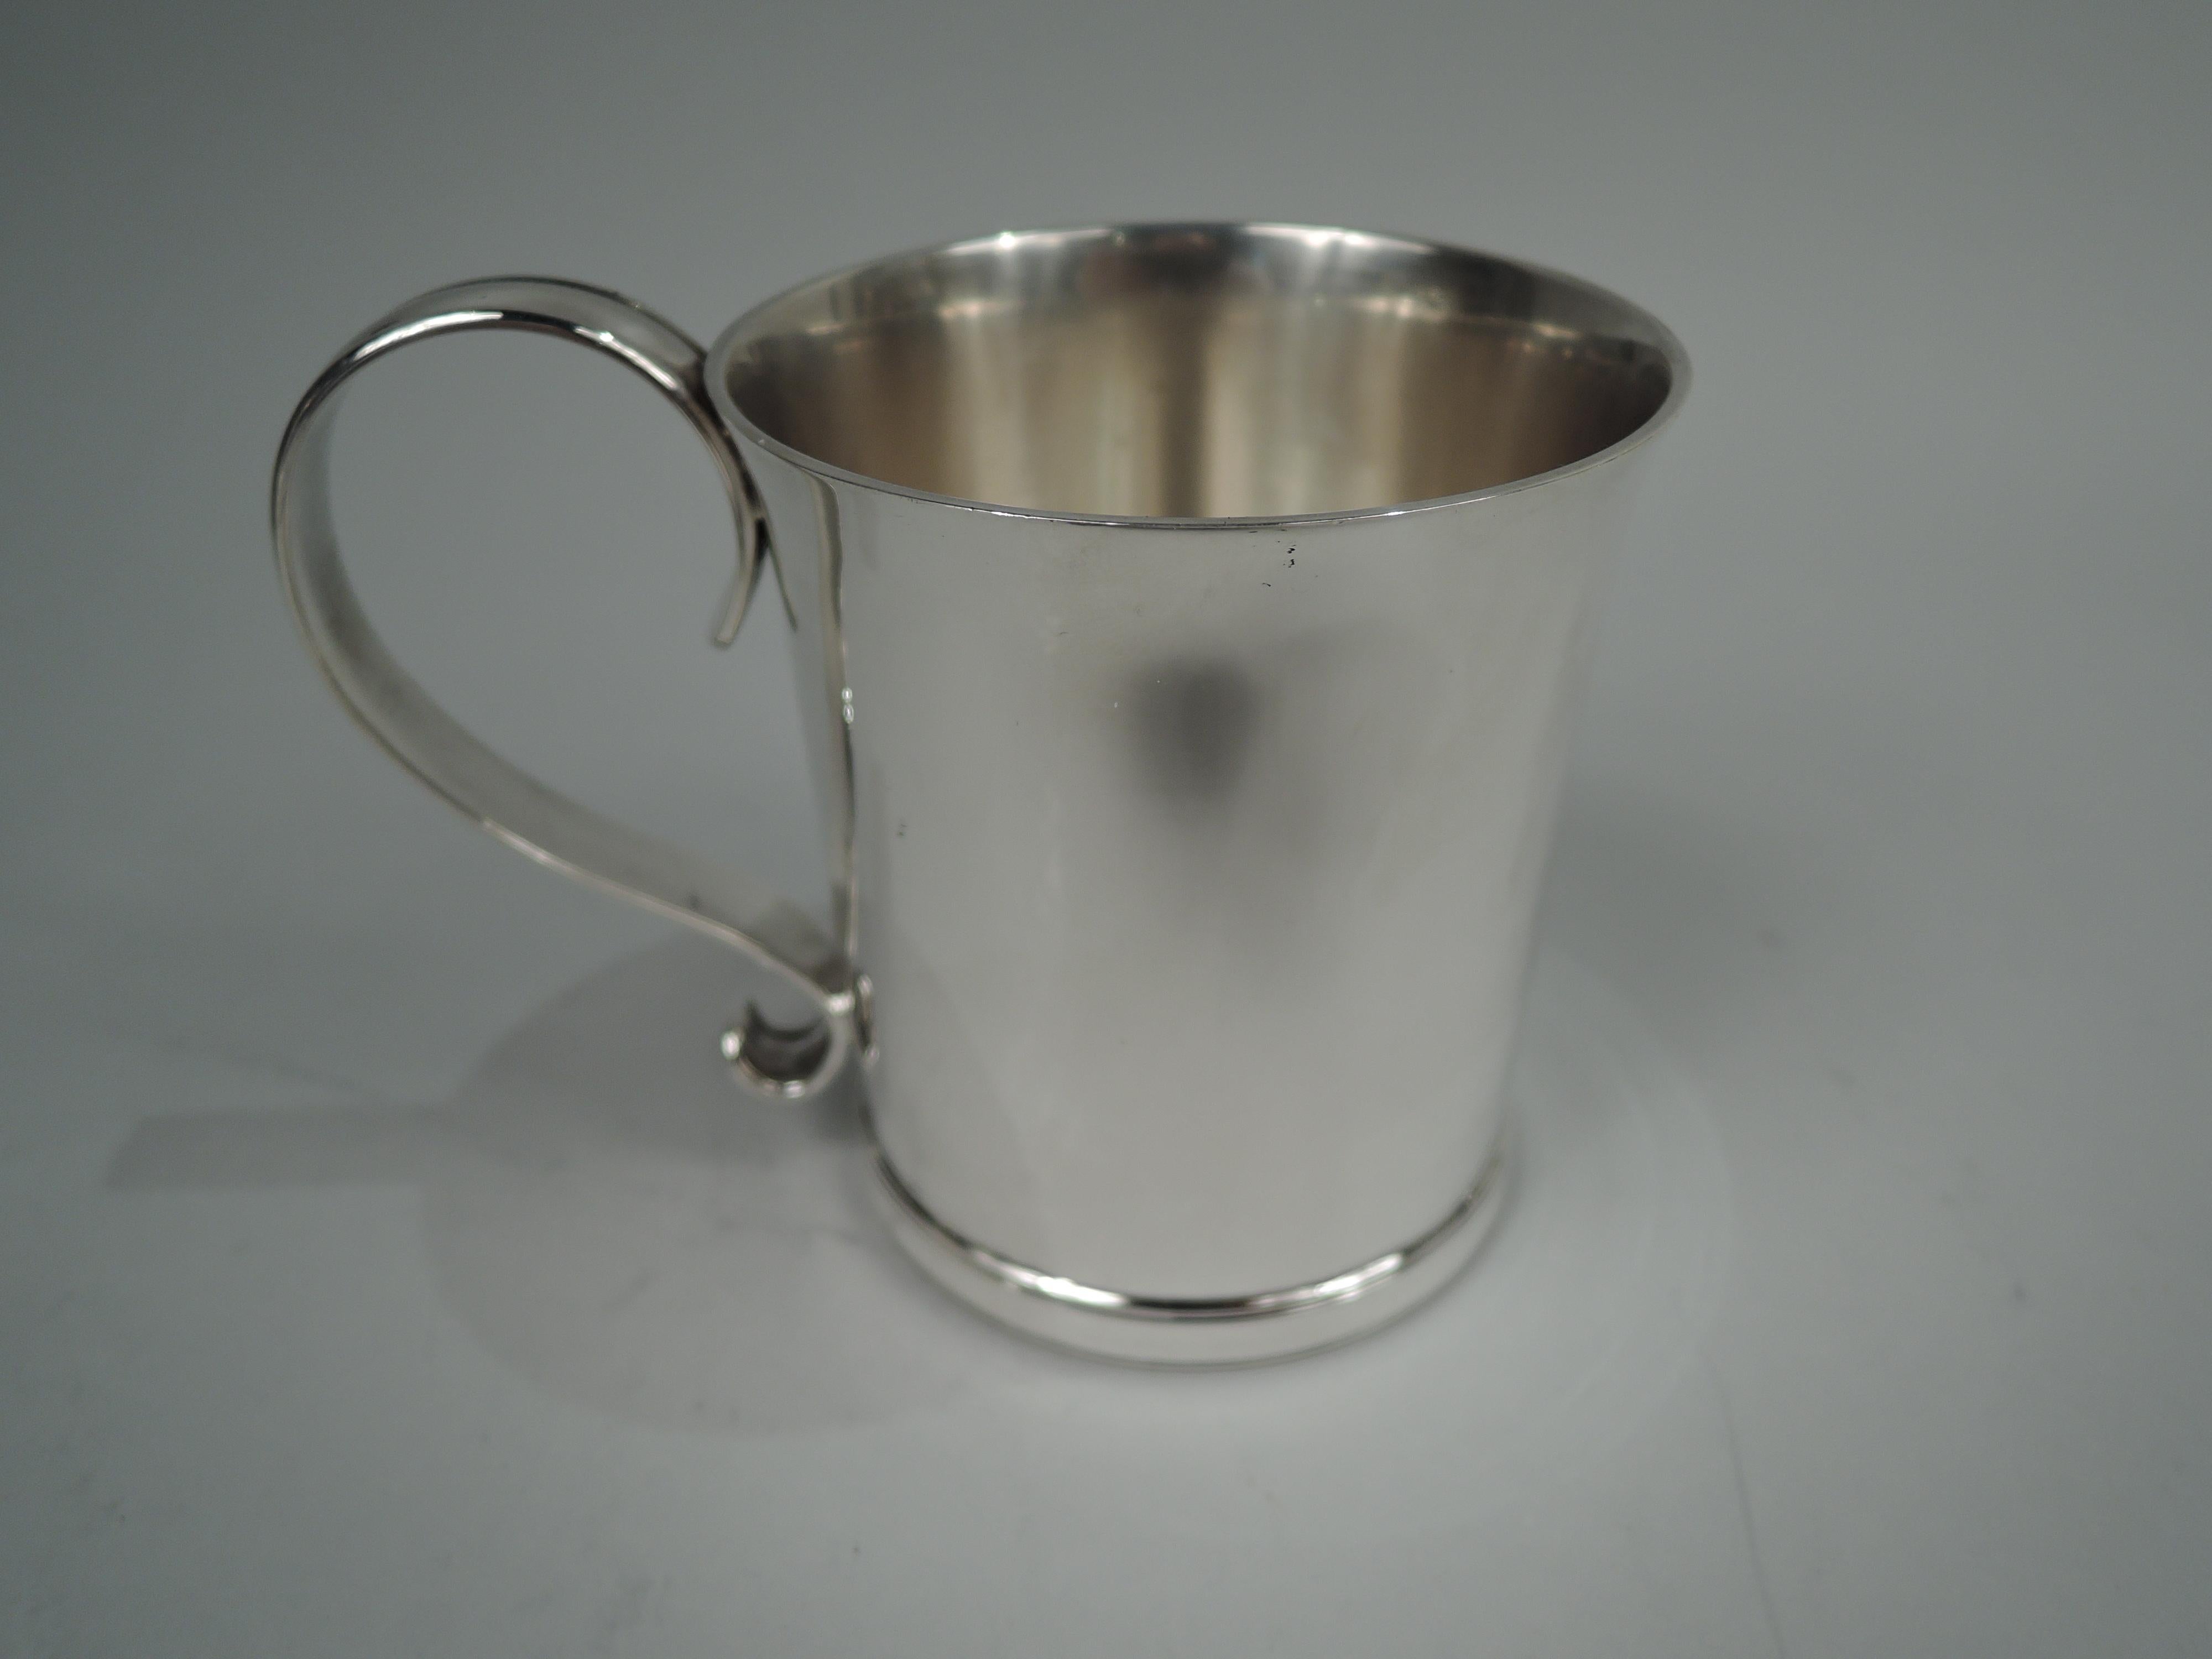 Colonial Revival sterling silver baby cup. Made by Tiffany & Co. in New York. Straight sides with gently flared rim, s-scroll handle and molded base. Lots of room for engraving. Fully marked including maker’s stamp, pattern no. 19184, and director’s